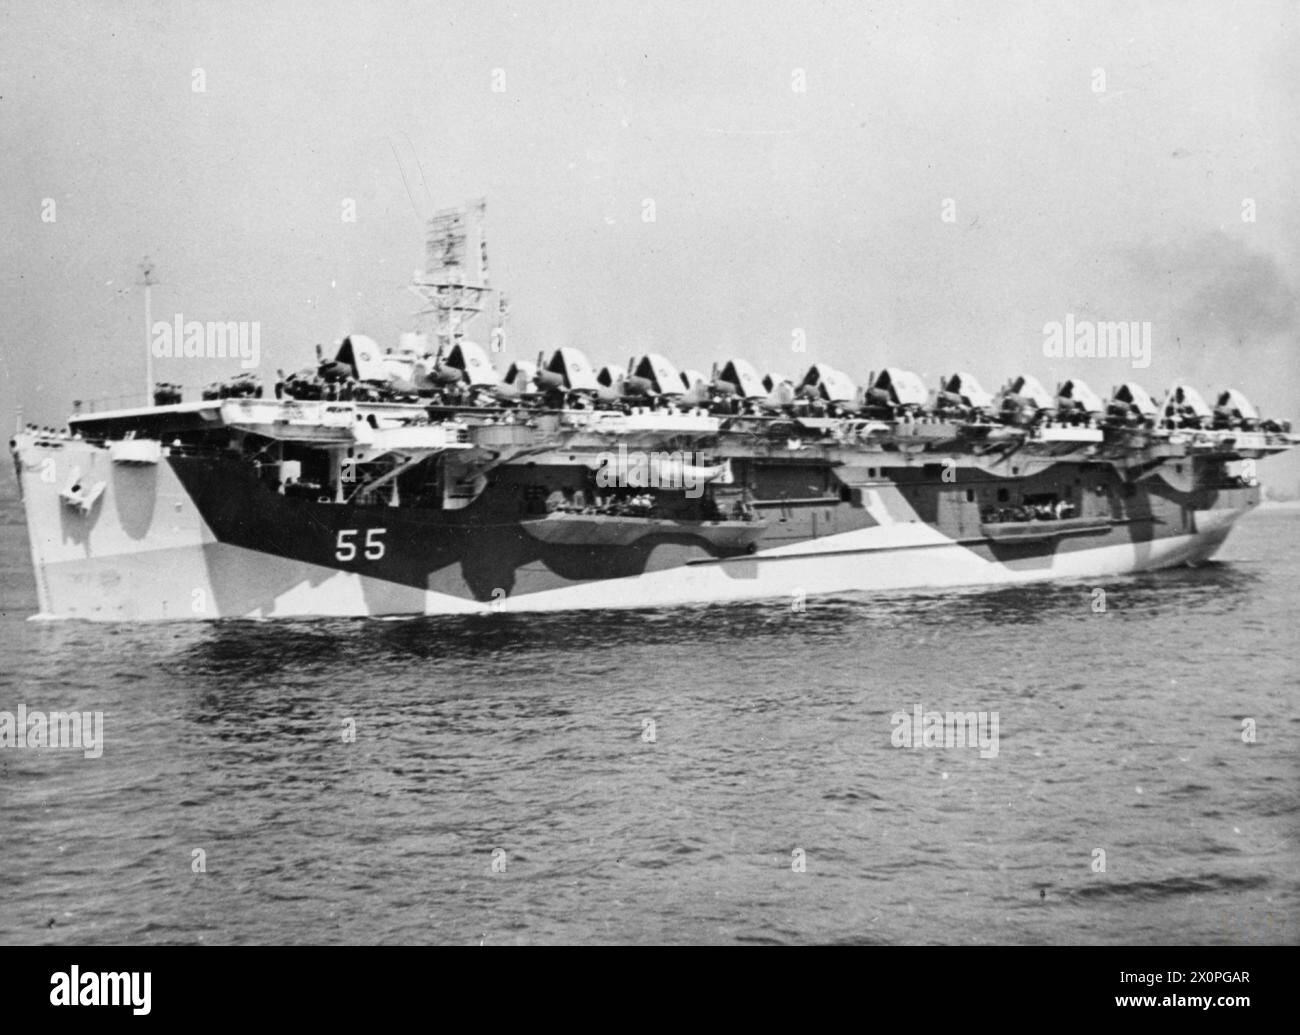 HMS SMITER, ESCORT CARRIER. 1944, ON BOARD HMS ARBITER, AT SEA IN THE ATLANTIC. - HMS SMITER, with Corsairs packing her deck Stock Photo